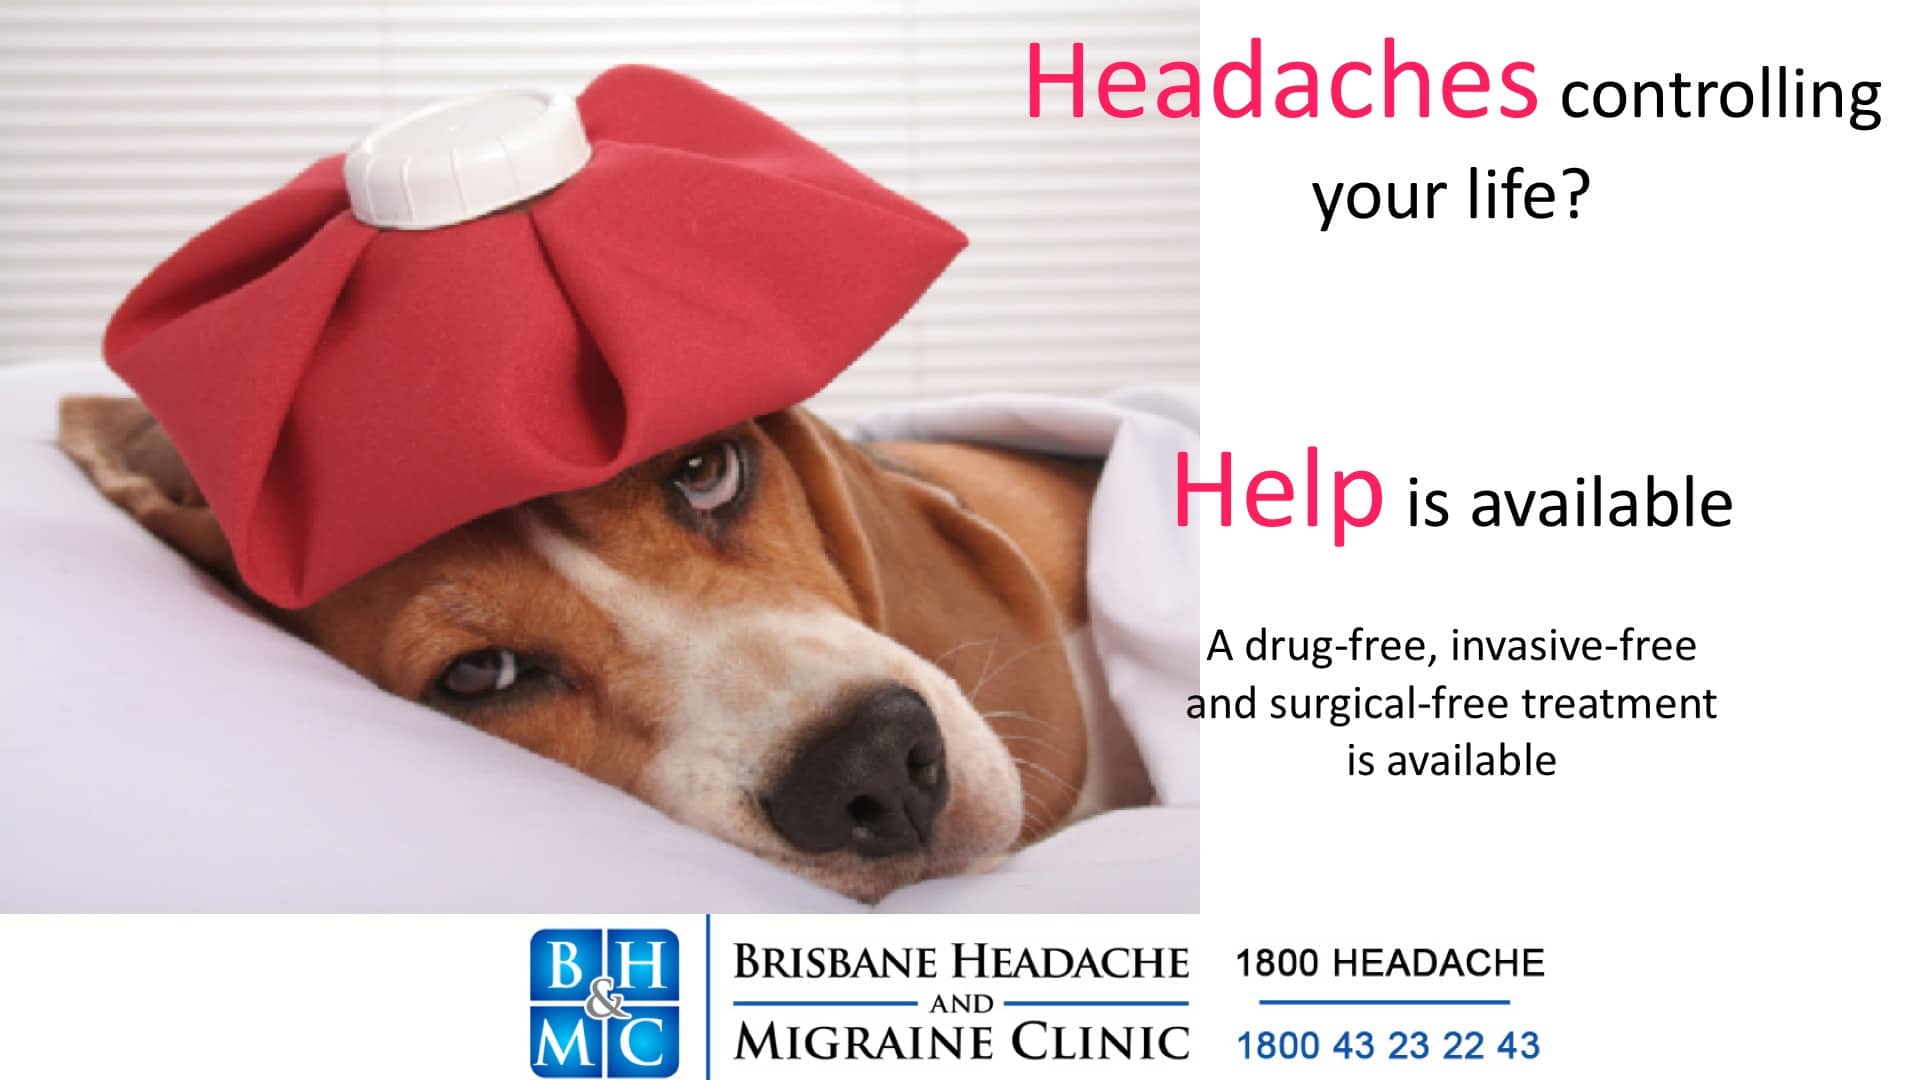 Medication Overuse May Increase Your Risk Of Developing Medication Overuse Headaches